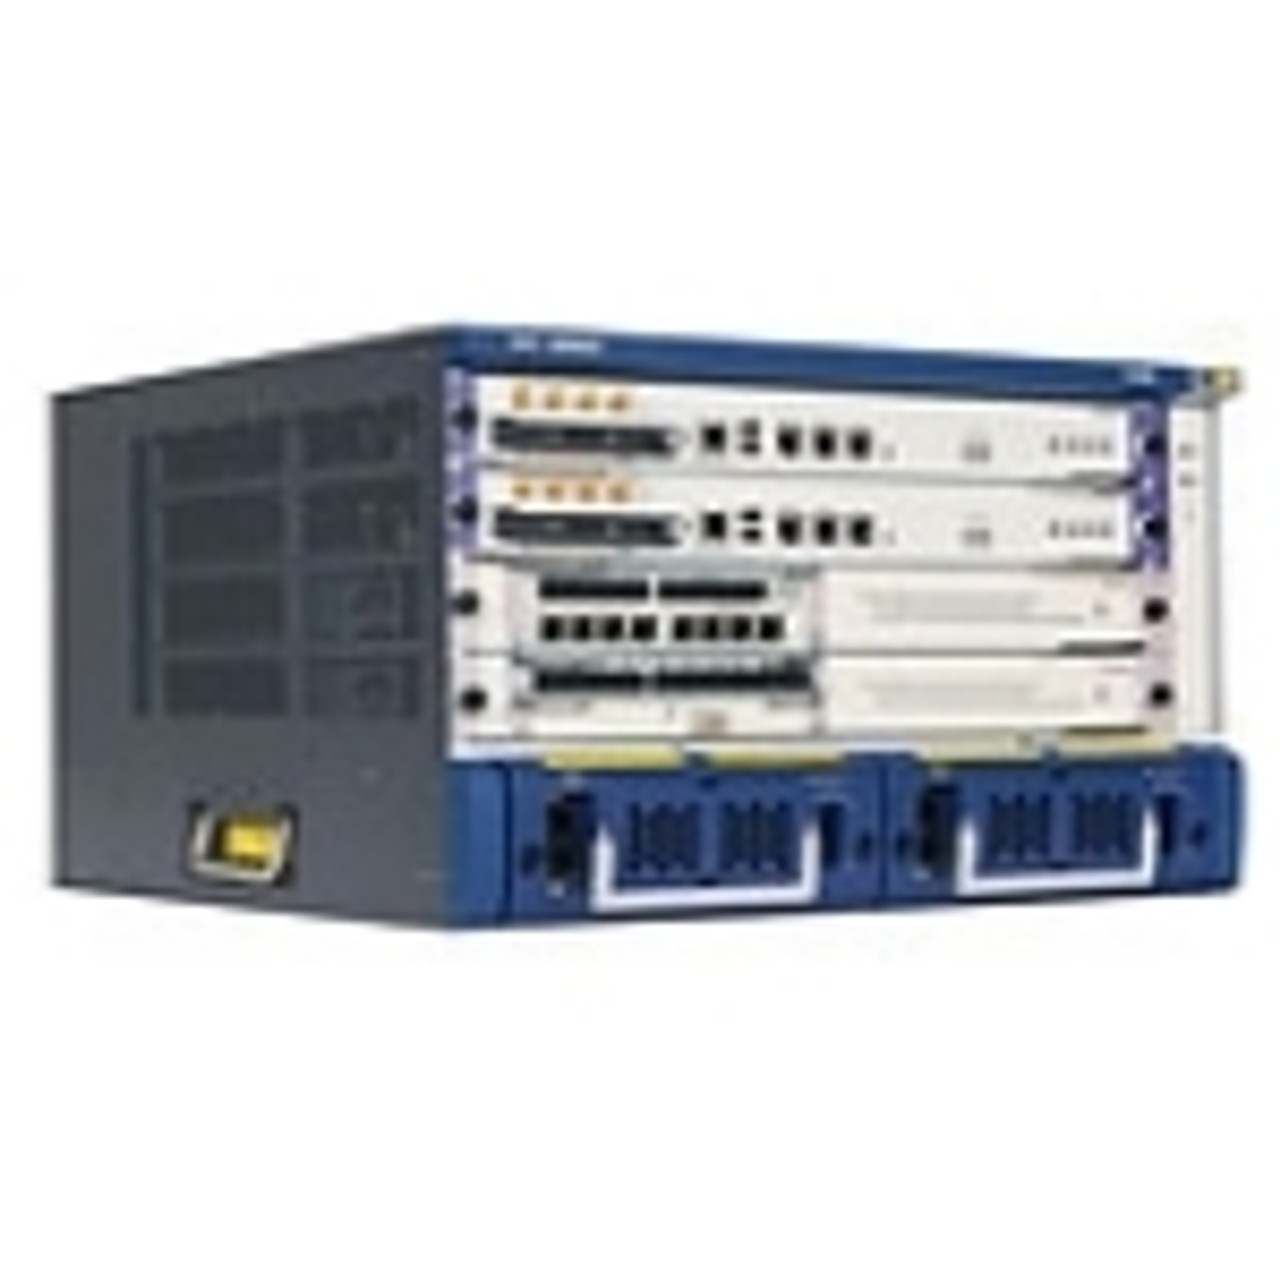 JC147B HP A8802 Router Chassis Management Port 4 Slots 6U Rack-mountable (Refurbished)